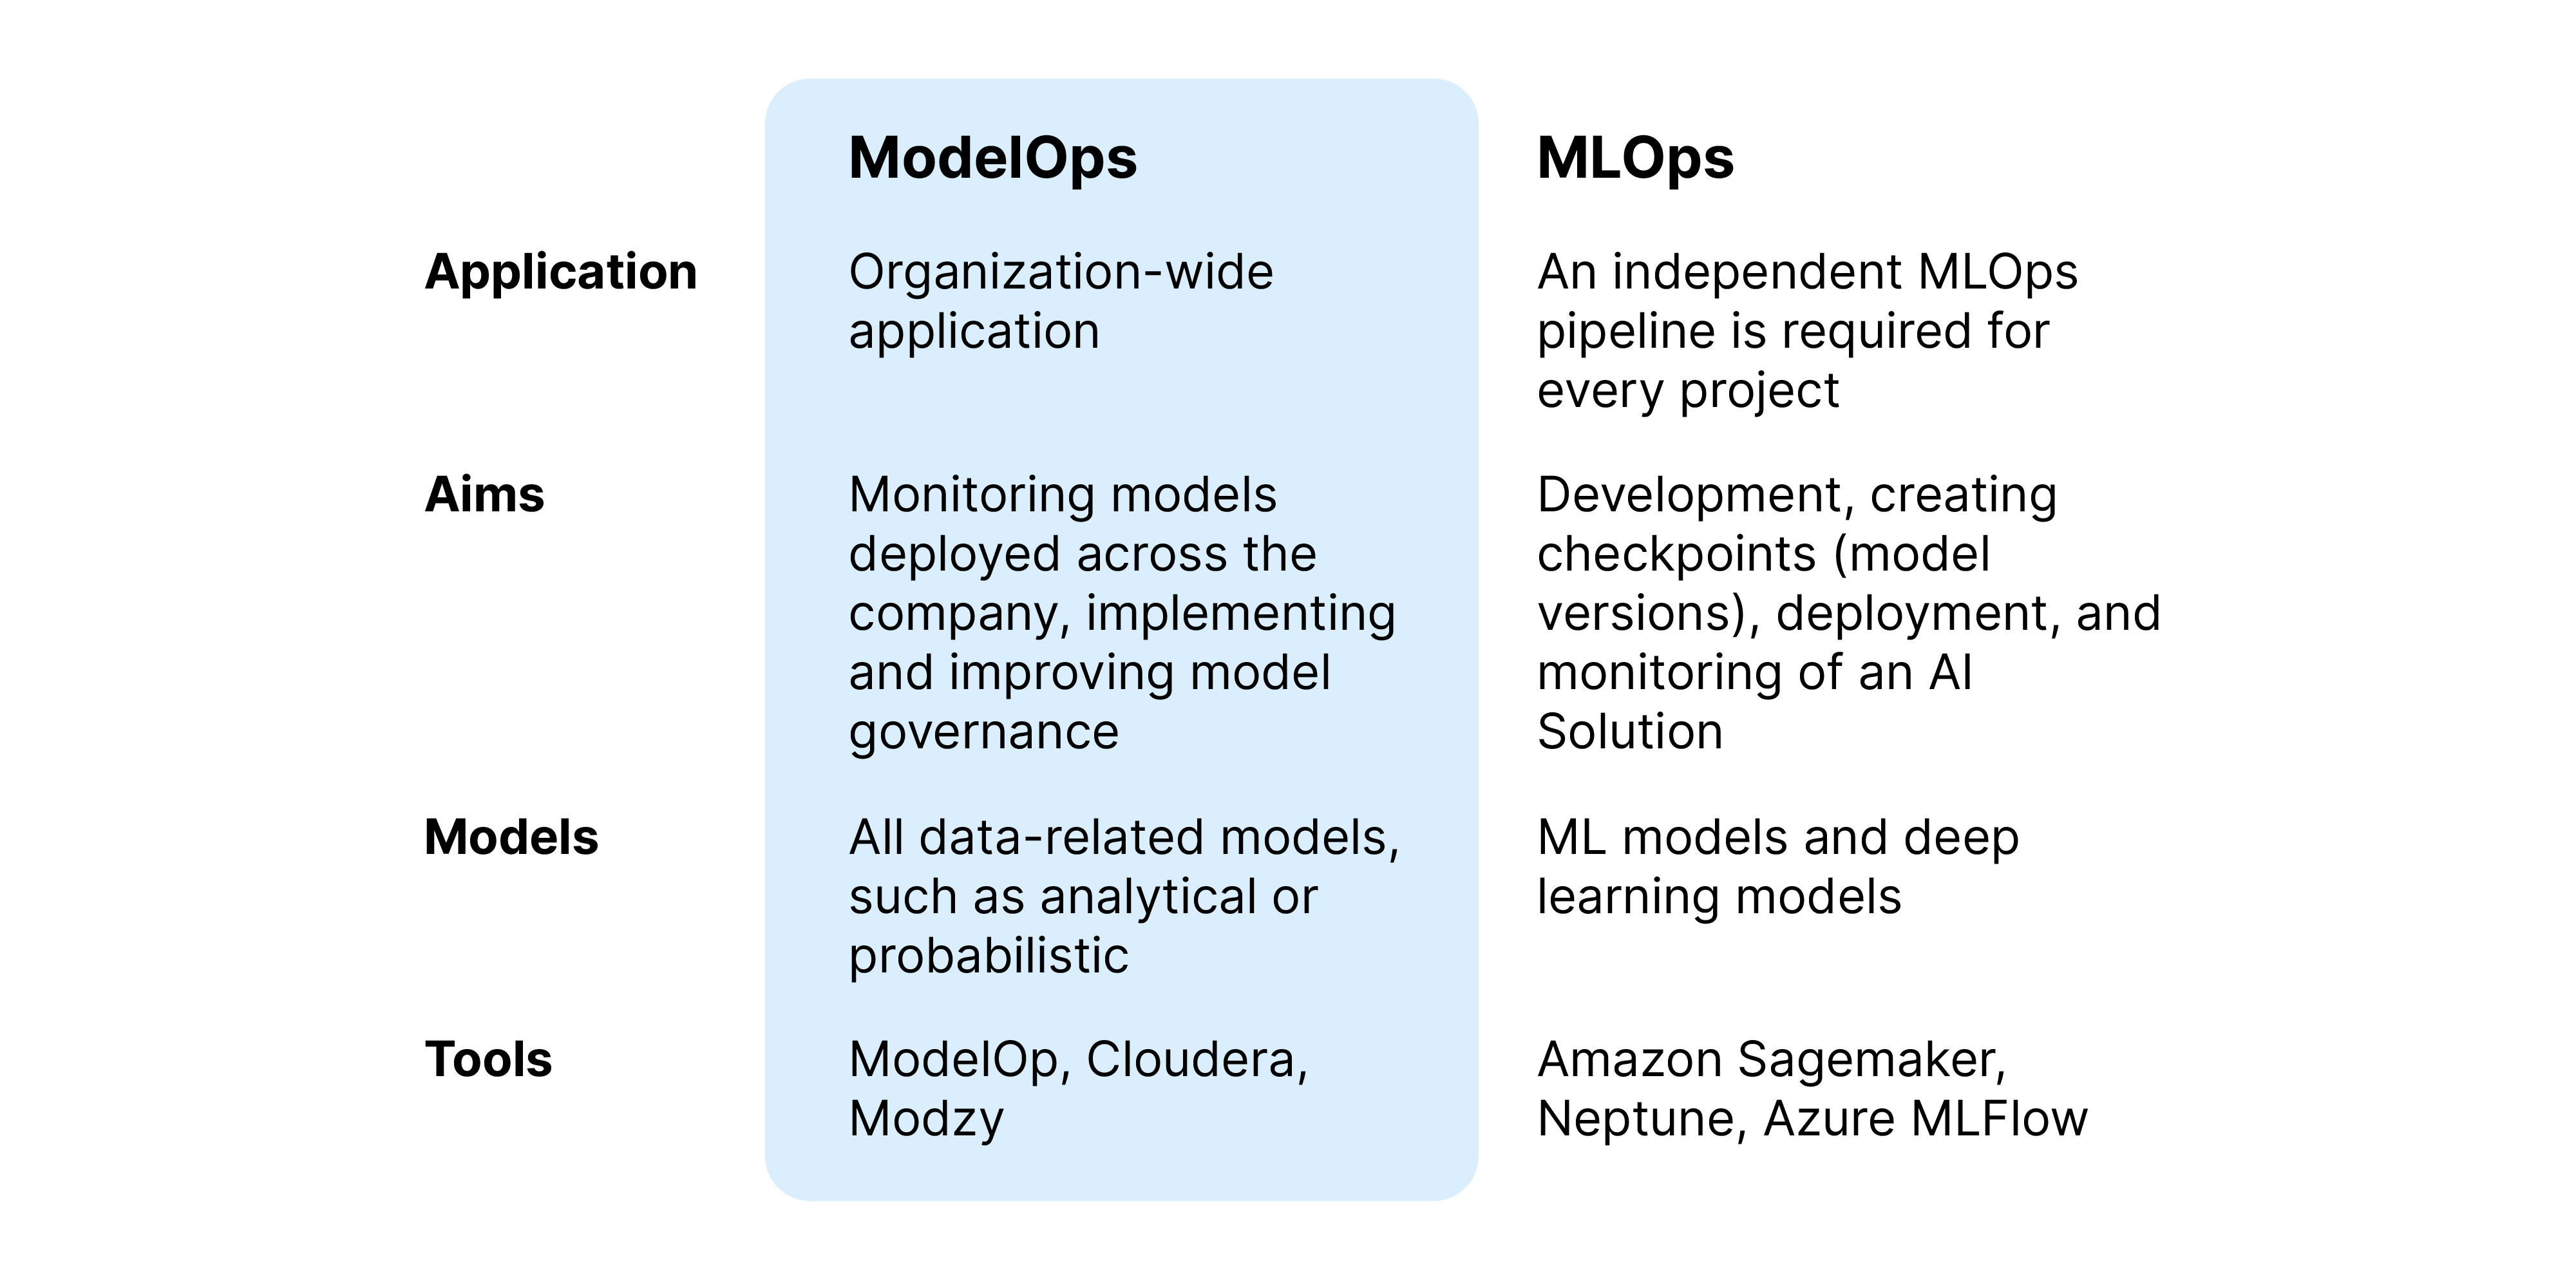 Differences between ModelOps and MLOps